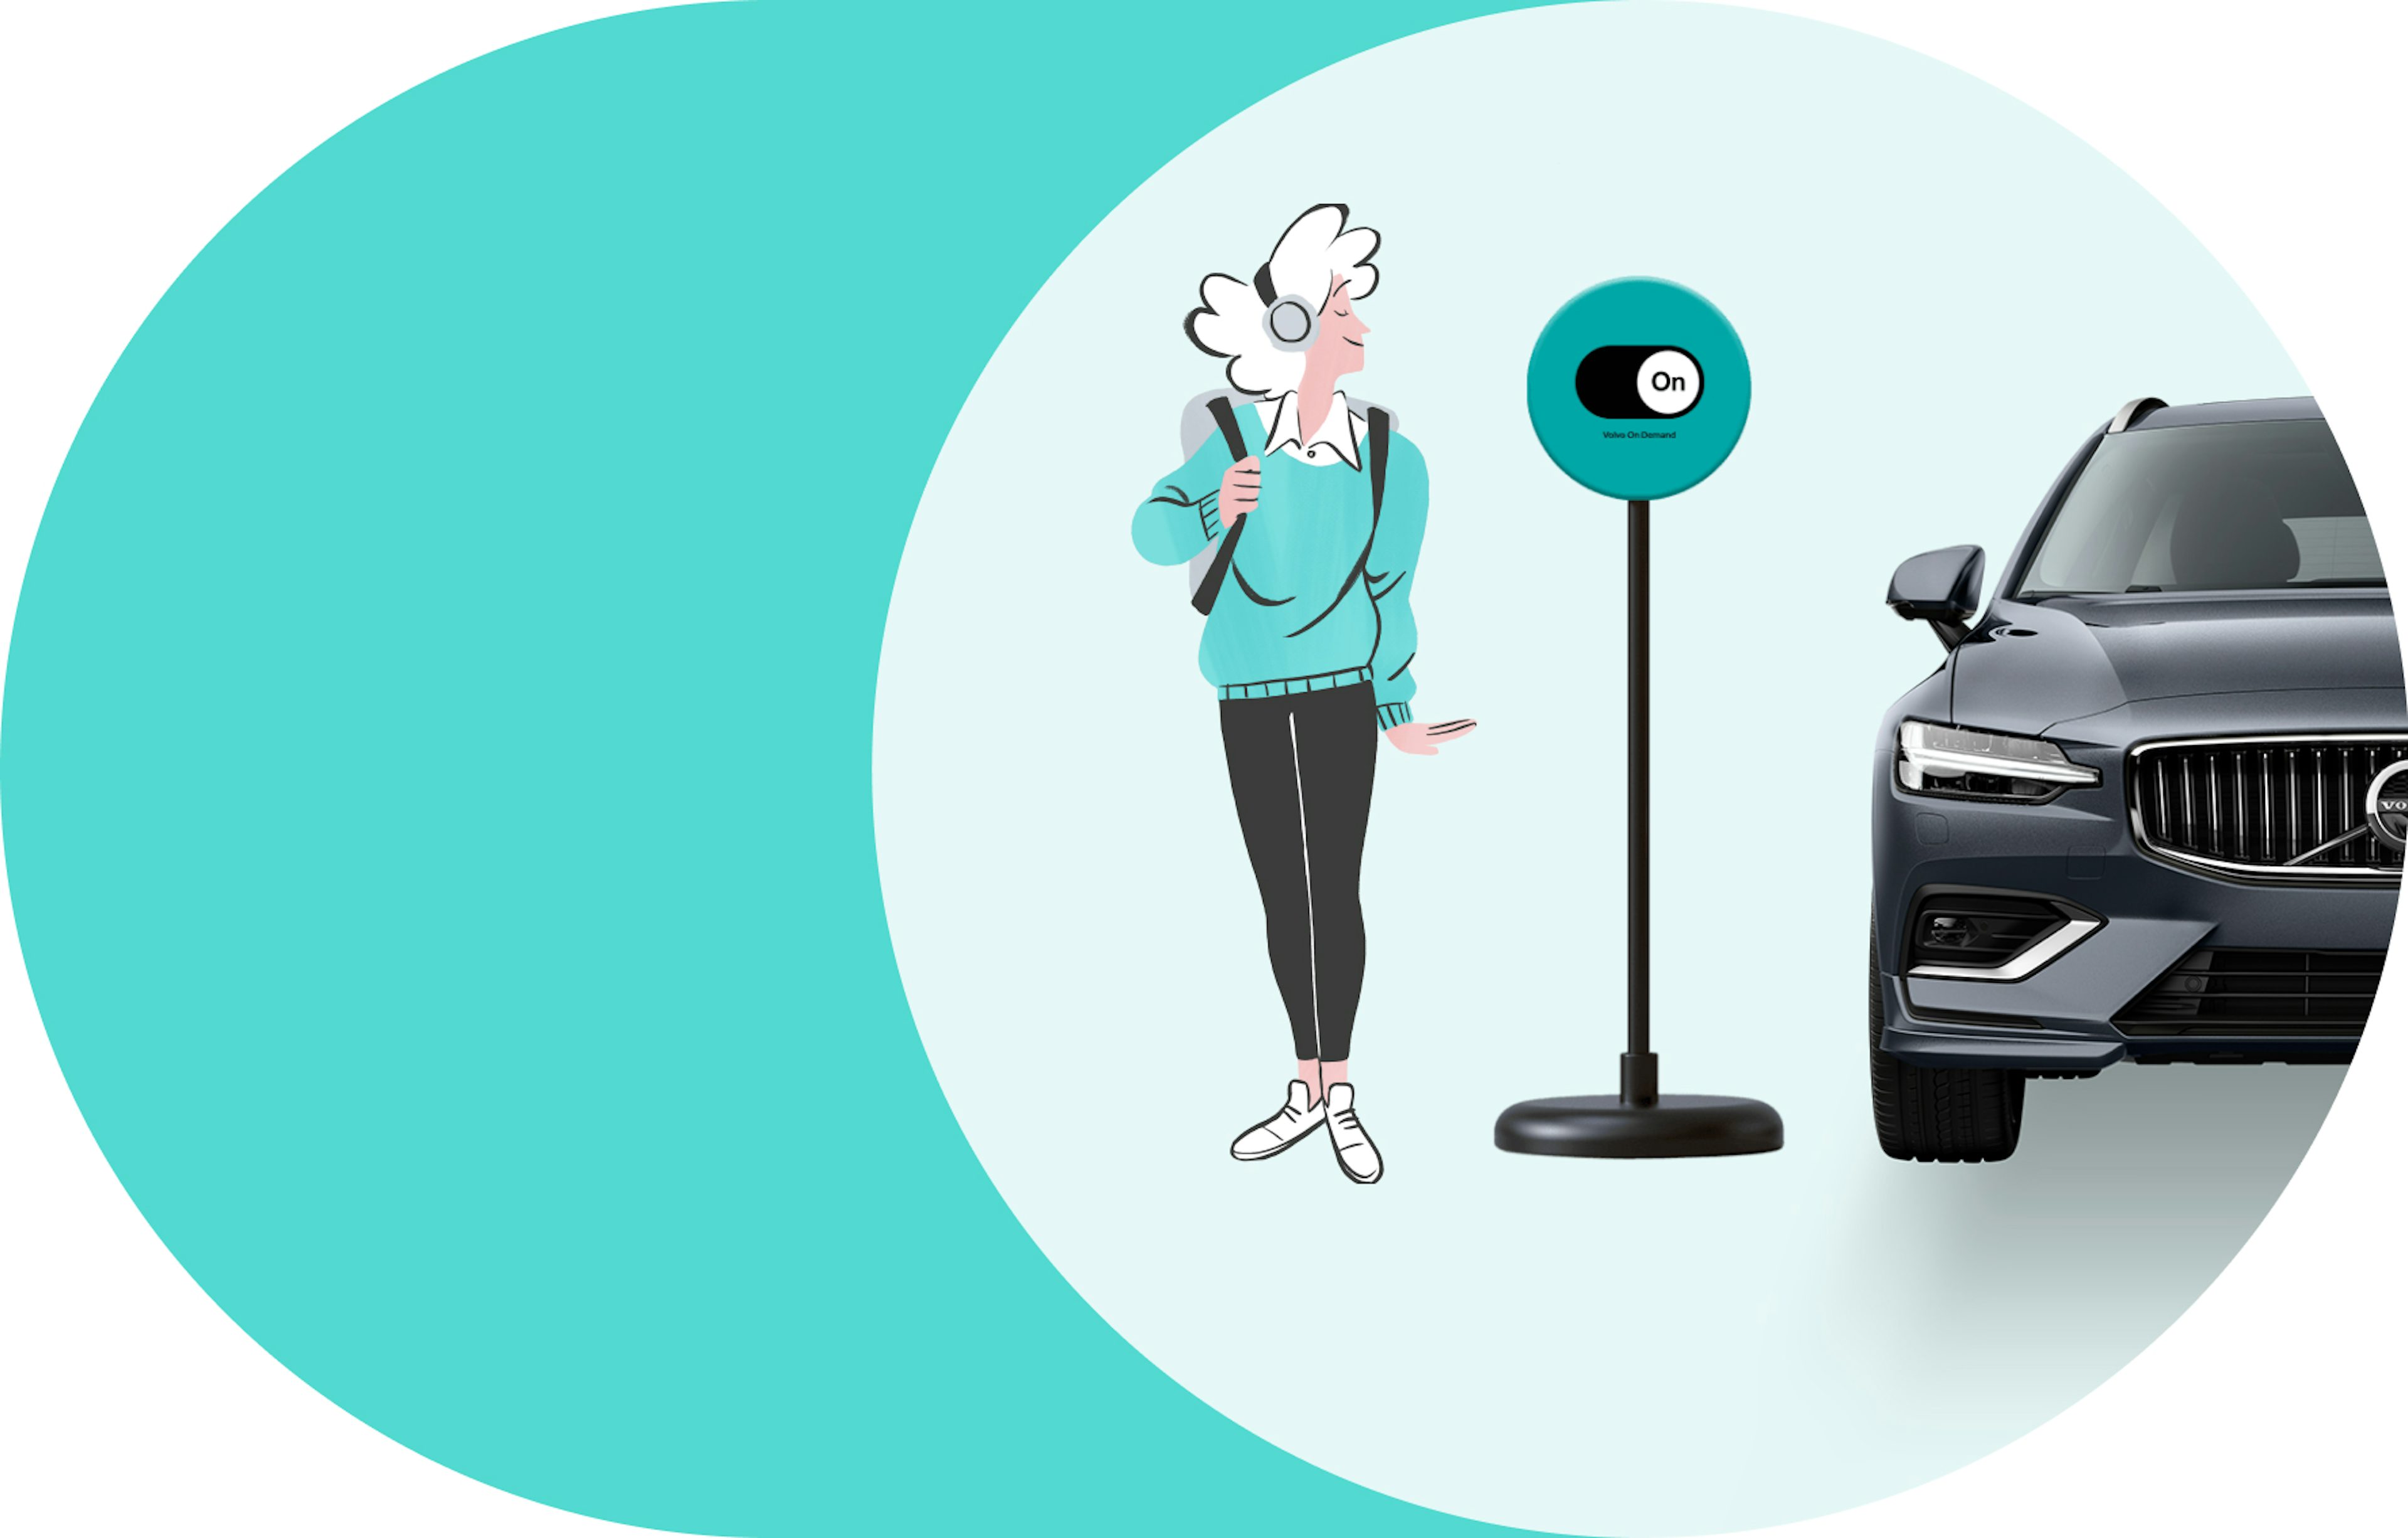 Illustrated woman with headphones standing next to a green Volvo On Demand sign and a Volvo car.